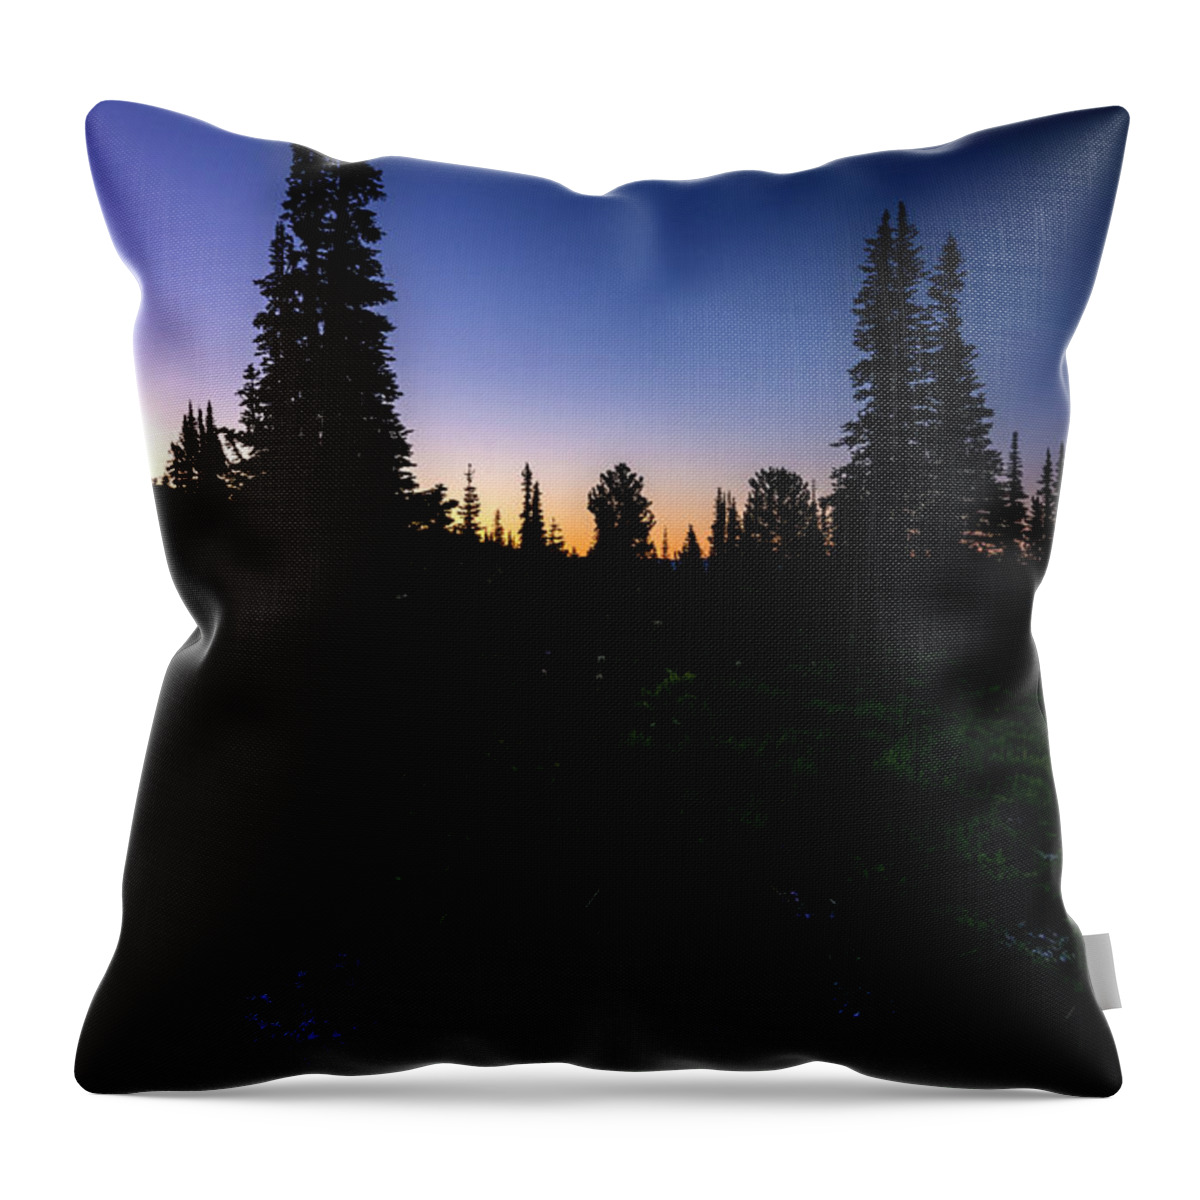 Tree Throw Pillow featuring the photograph Tree Silhouette Sunrise 2 by Pelo Blanco Photo